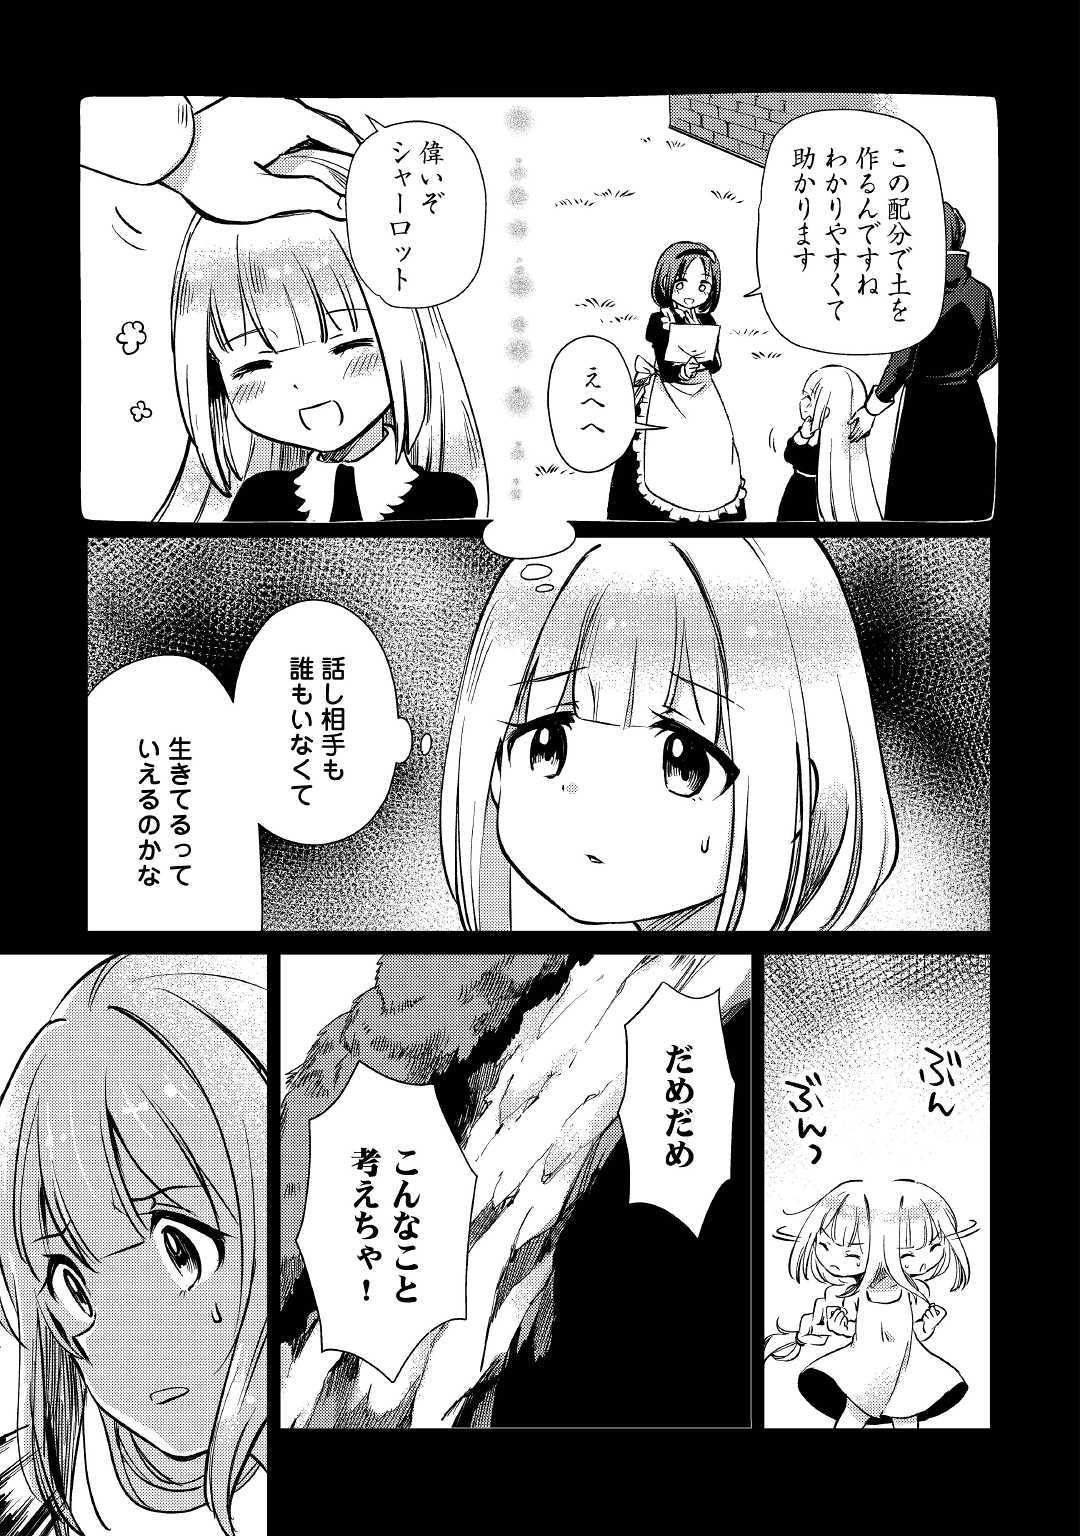 The Former Structural Researcher’s Story of Otherworldly Adventure 第14話 - Page 3